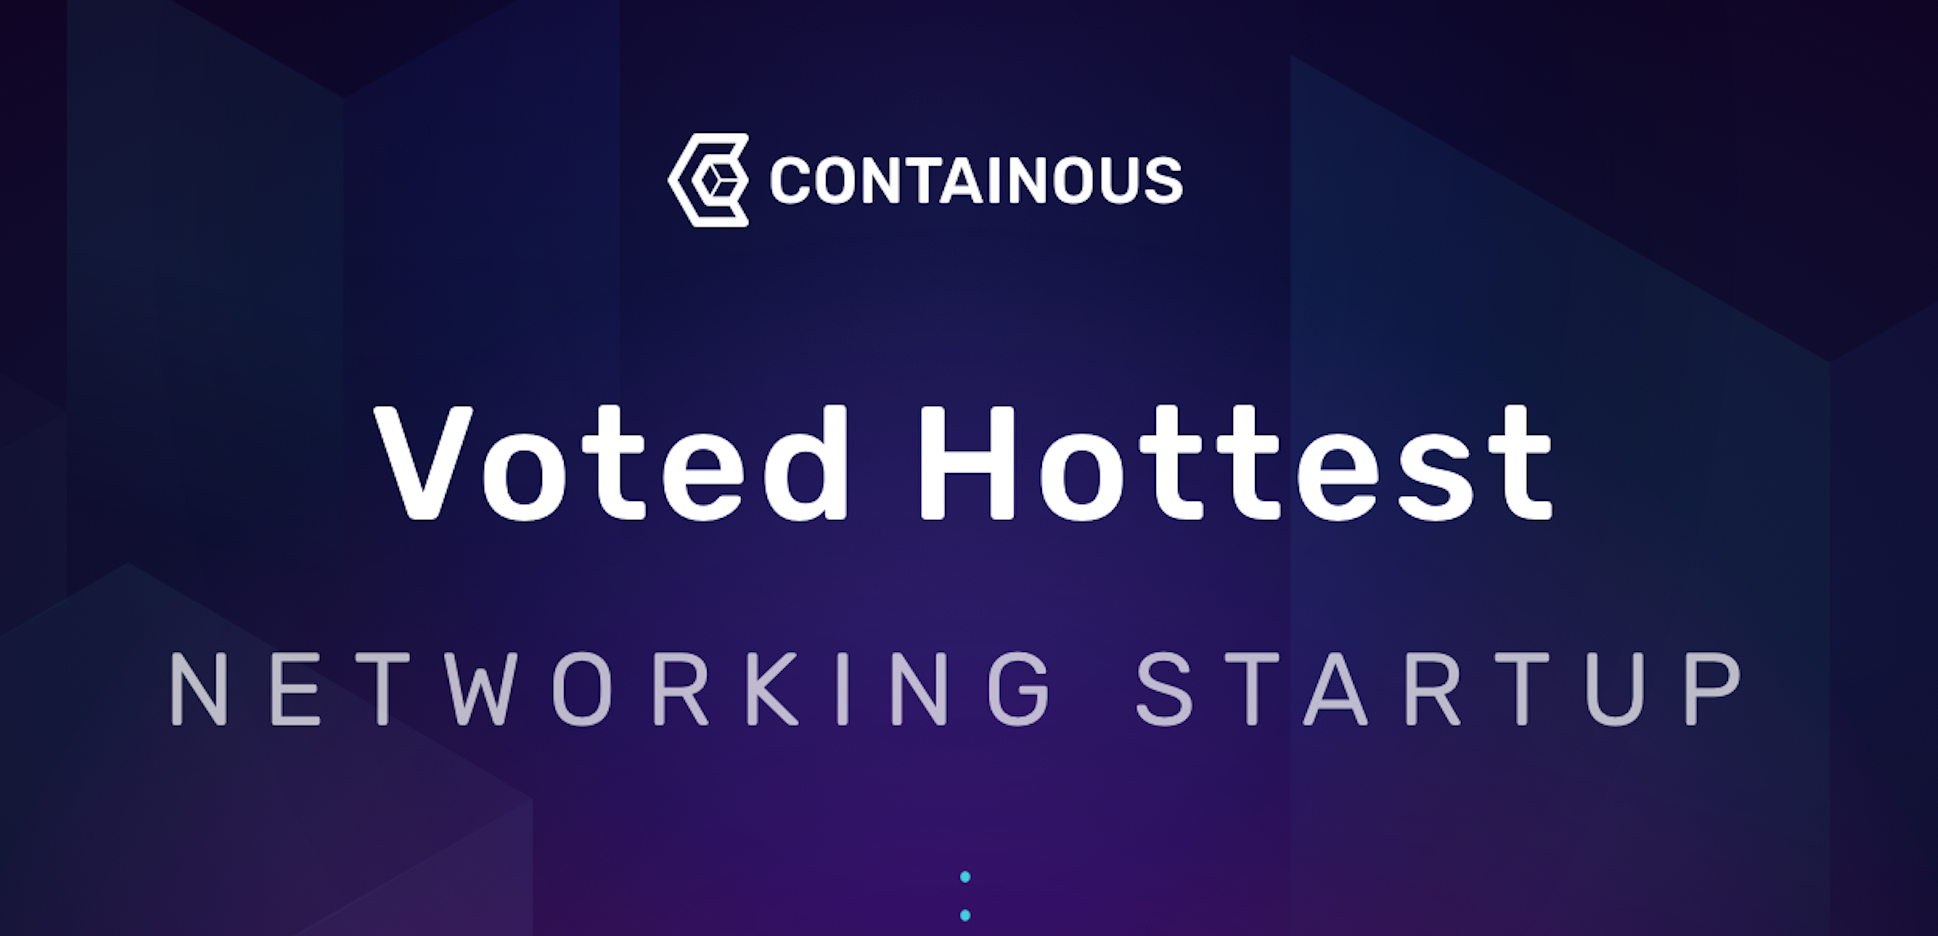 Containous Voted Hottest Networking Startup